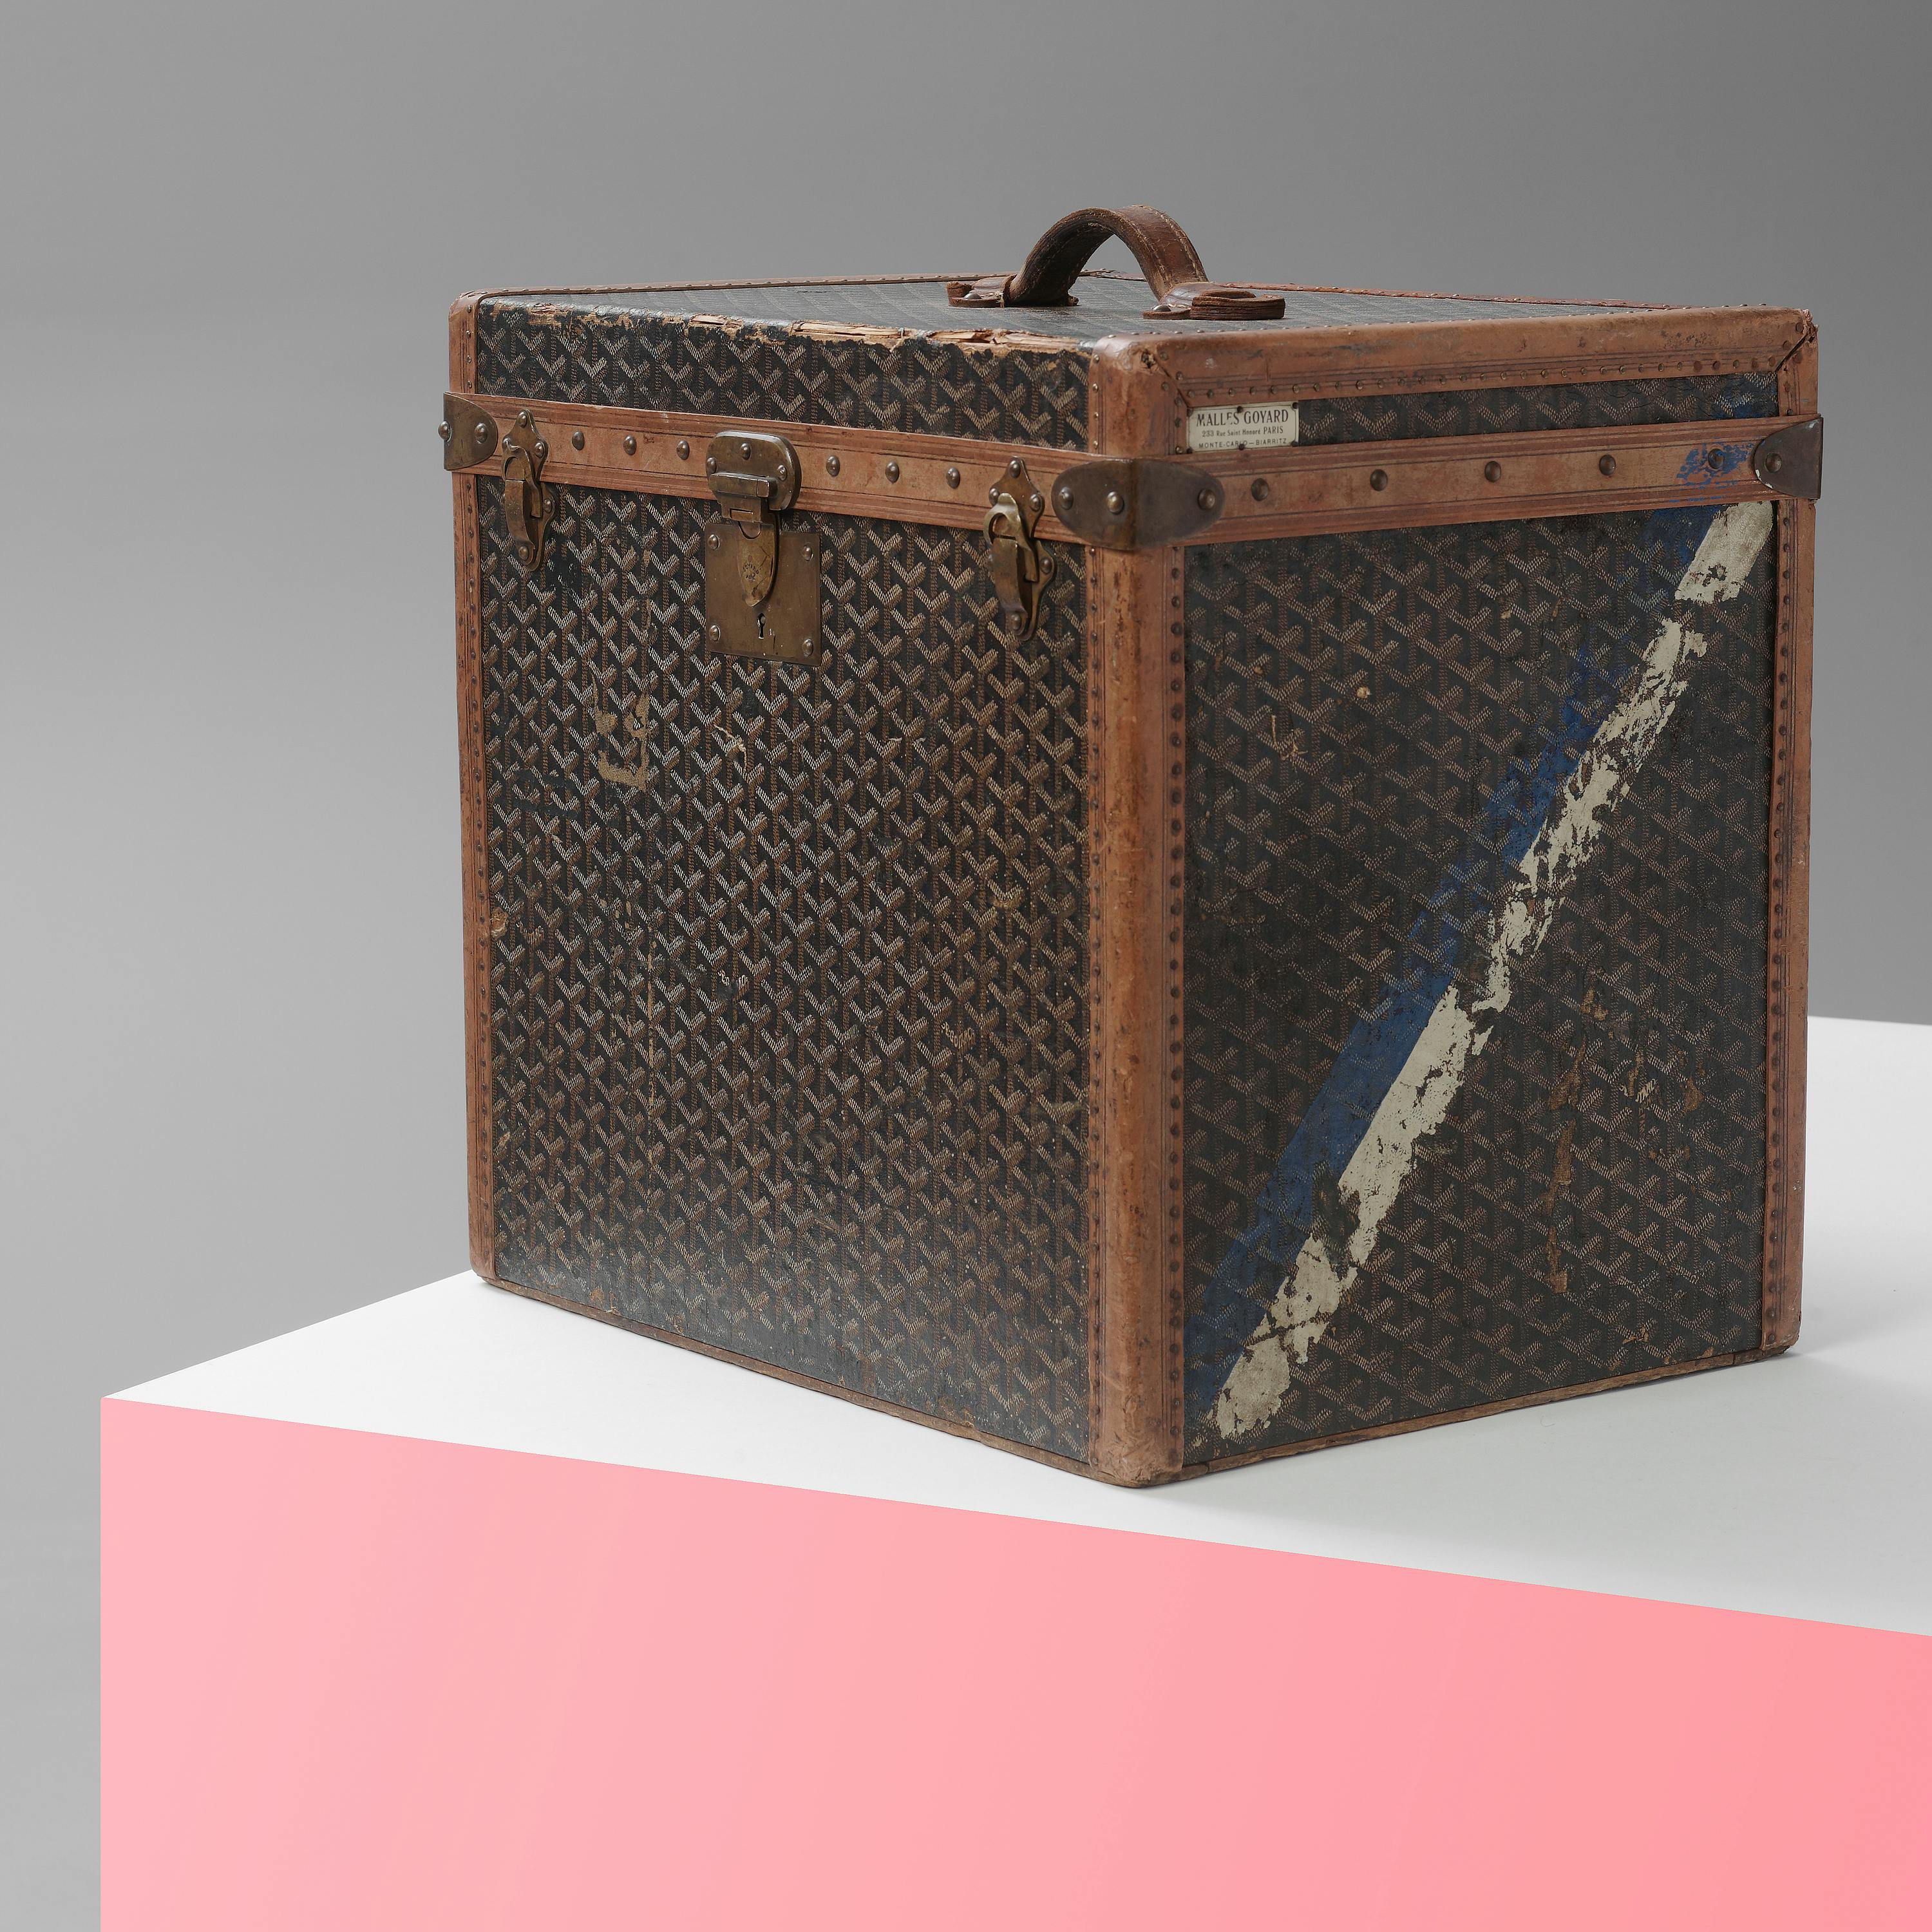 A vintage Louis Vuitton Trunk has been repurposed into a room for